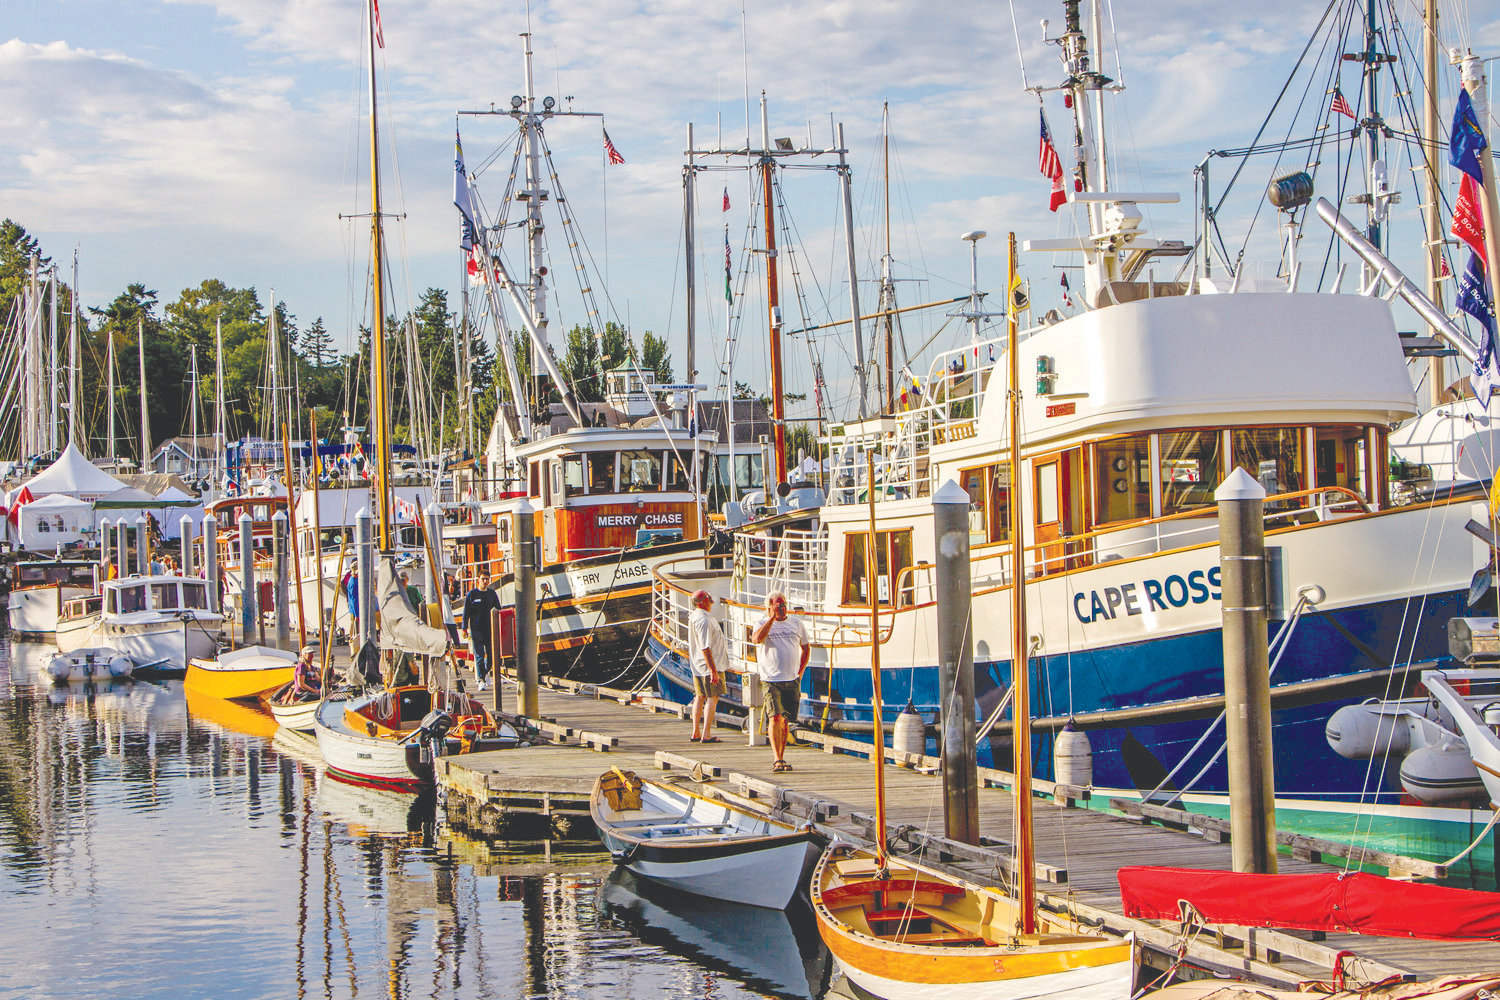 Point Hudson is home to the Wooden Boat Festival, where boats of all sizes and shapes cram into the marina for visitors and locals to admire.